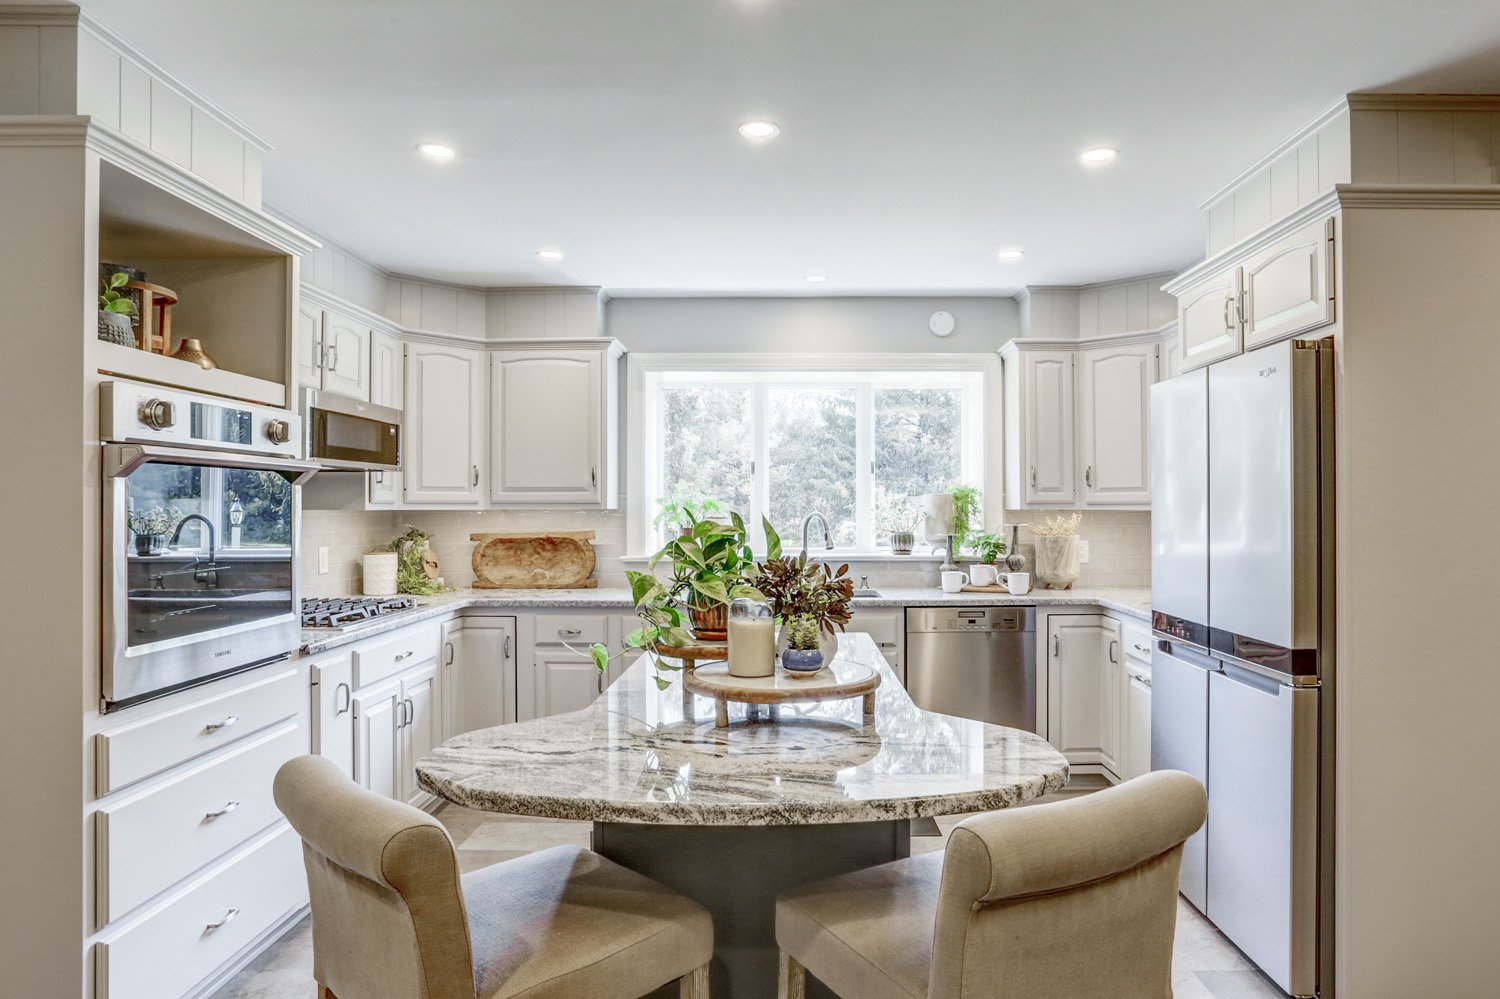 Conestoga Valley Kitchen Remodel with Island Seating and bright lighting